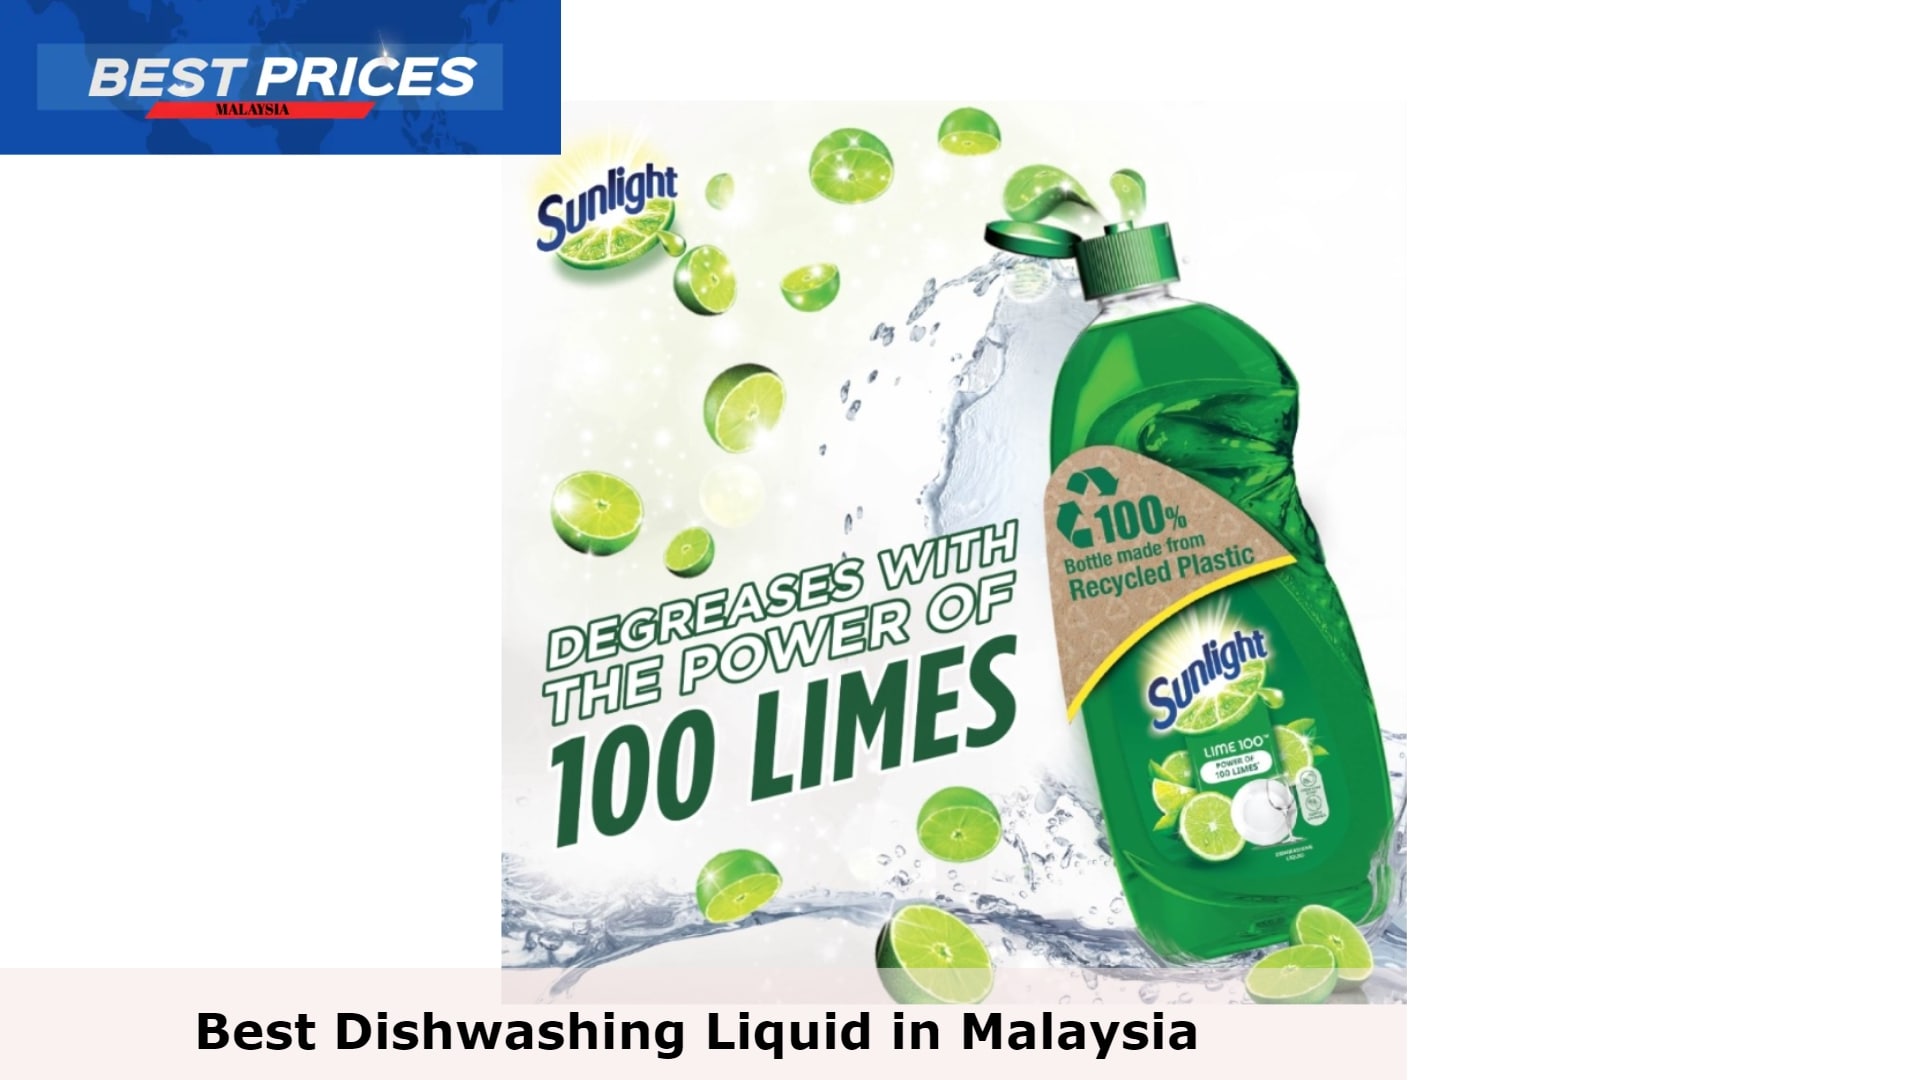 Sunlight Dishwashing Liquid (Lime) - Dishwashing Liquid Malaysia, What is a dishwashing liquid used for?, Is dishwashing liquid useful or harmful?, What is the difference between detergent and dishwashing liquid?, What is the most popular dishwashing liquid in Malaysia?, Which brand of dishwashing liquid is most trusted in Malaysia?, What is the safest dishwashing liquid in Malaysia?, Which dishwashing liquid is best for hands in Malaysia?, best dish soap, dishwashing liquid for sensitive skin, dishwashing liquid reviews,